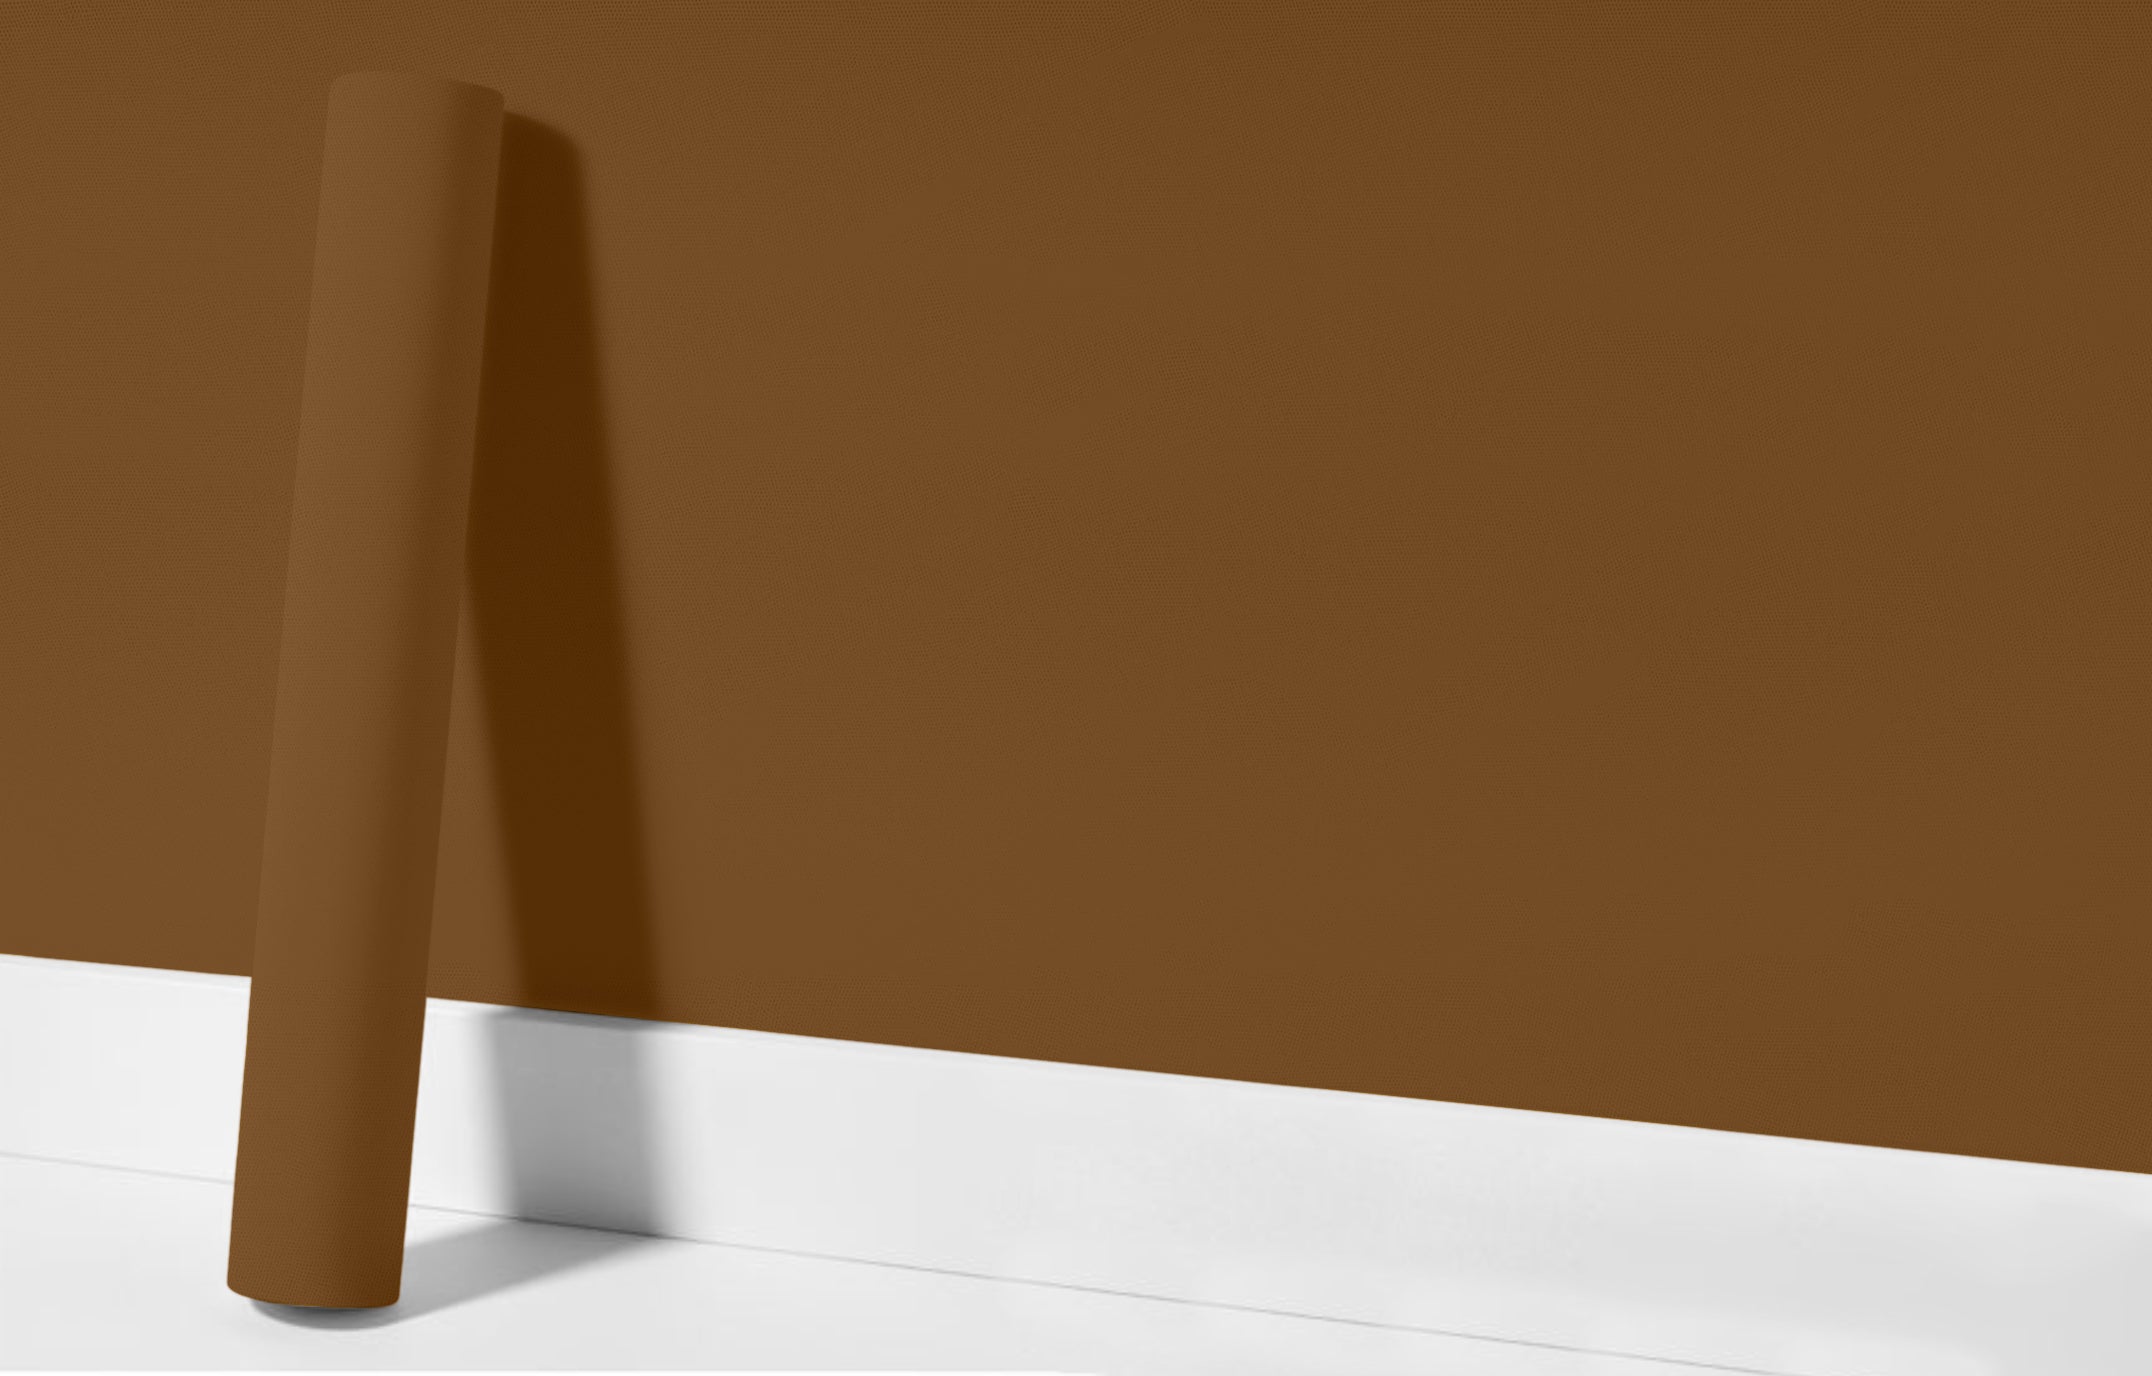 Peel & Stick Removable Re-usable Paint - Color RAL 8008 Olive Brown - offRAL™ - RALRAW LLC, USA